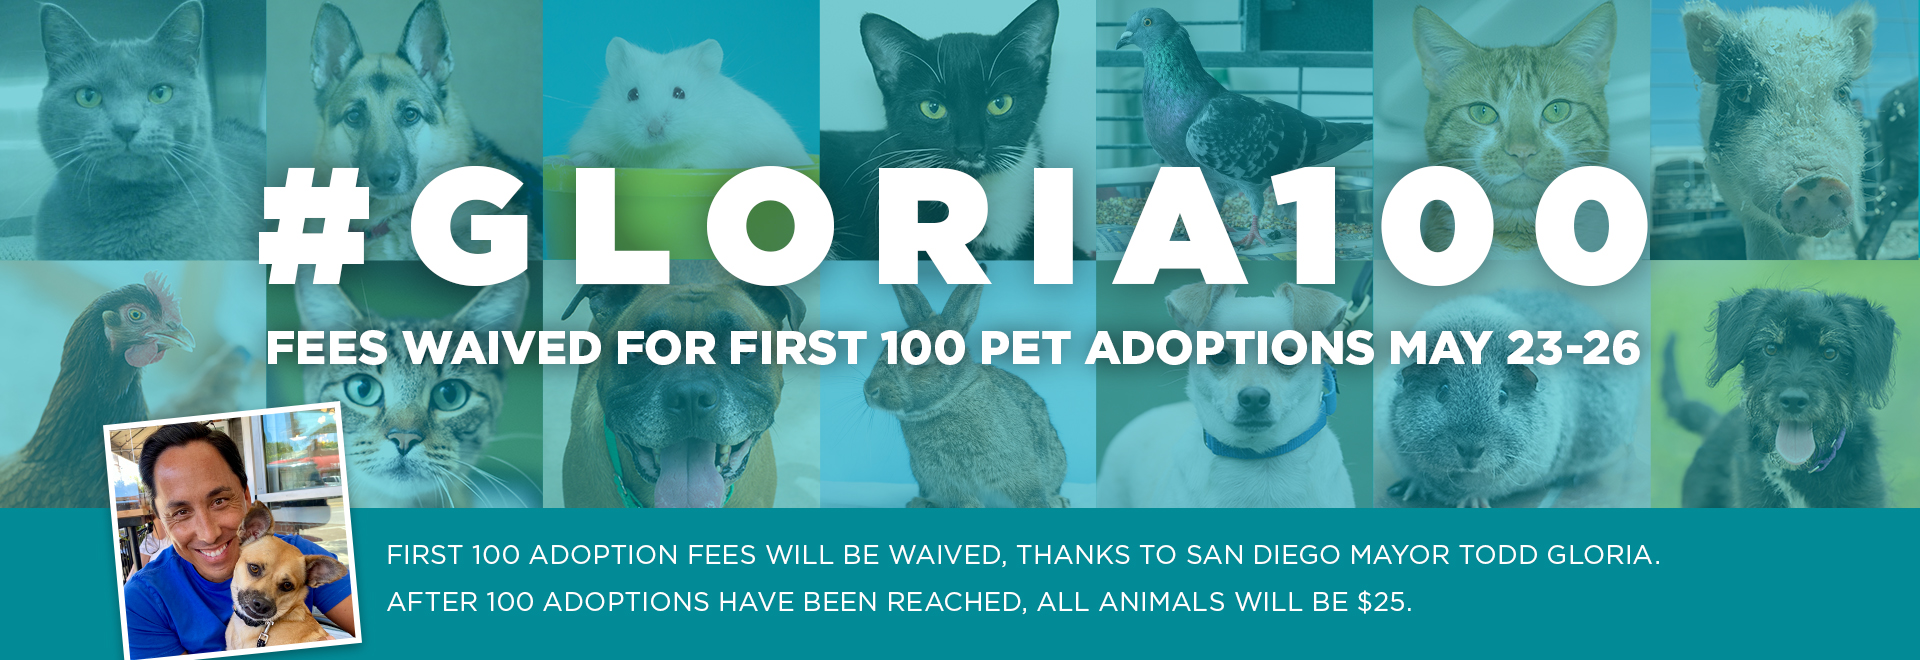 #Gloria100 Fees waived for first 100 pet adoptions May 23-26 | First 100 adoption fees will be waived, thanks to San Diego mayor Todd Gloria. After 100 adoptions have been reached, all animals will be $25.